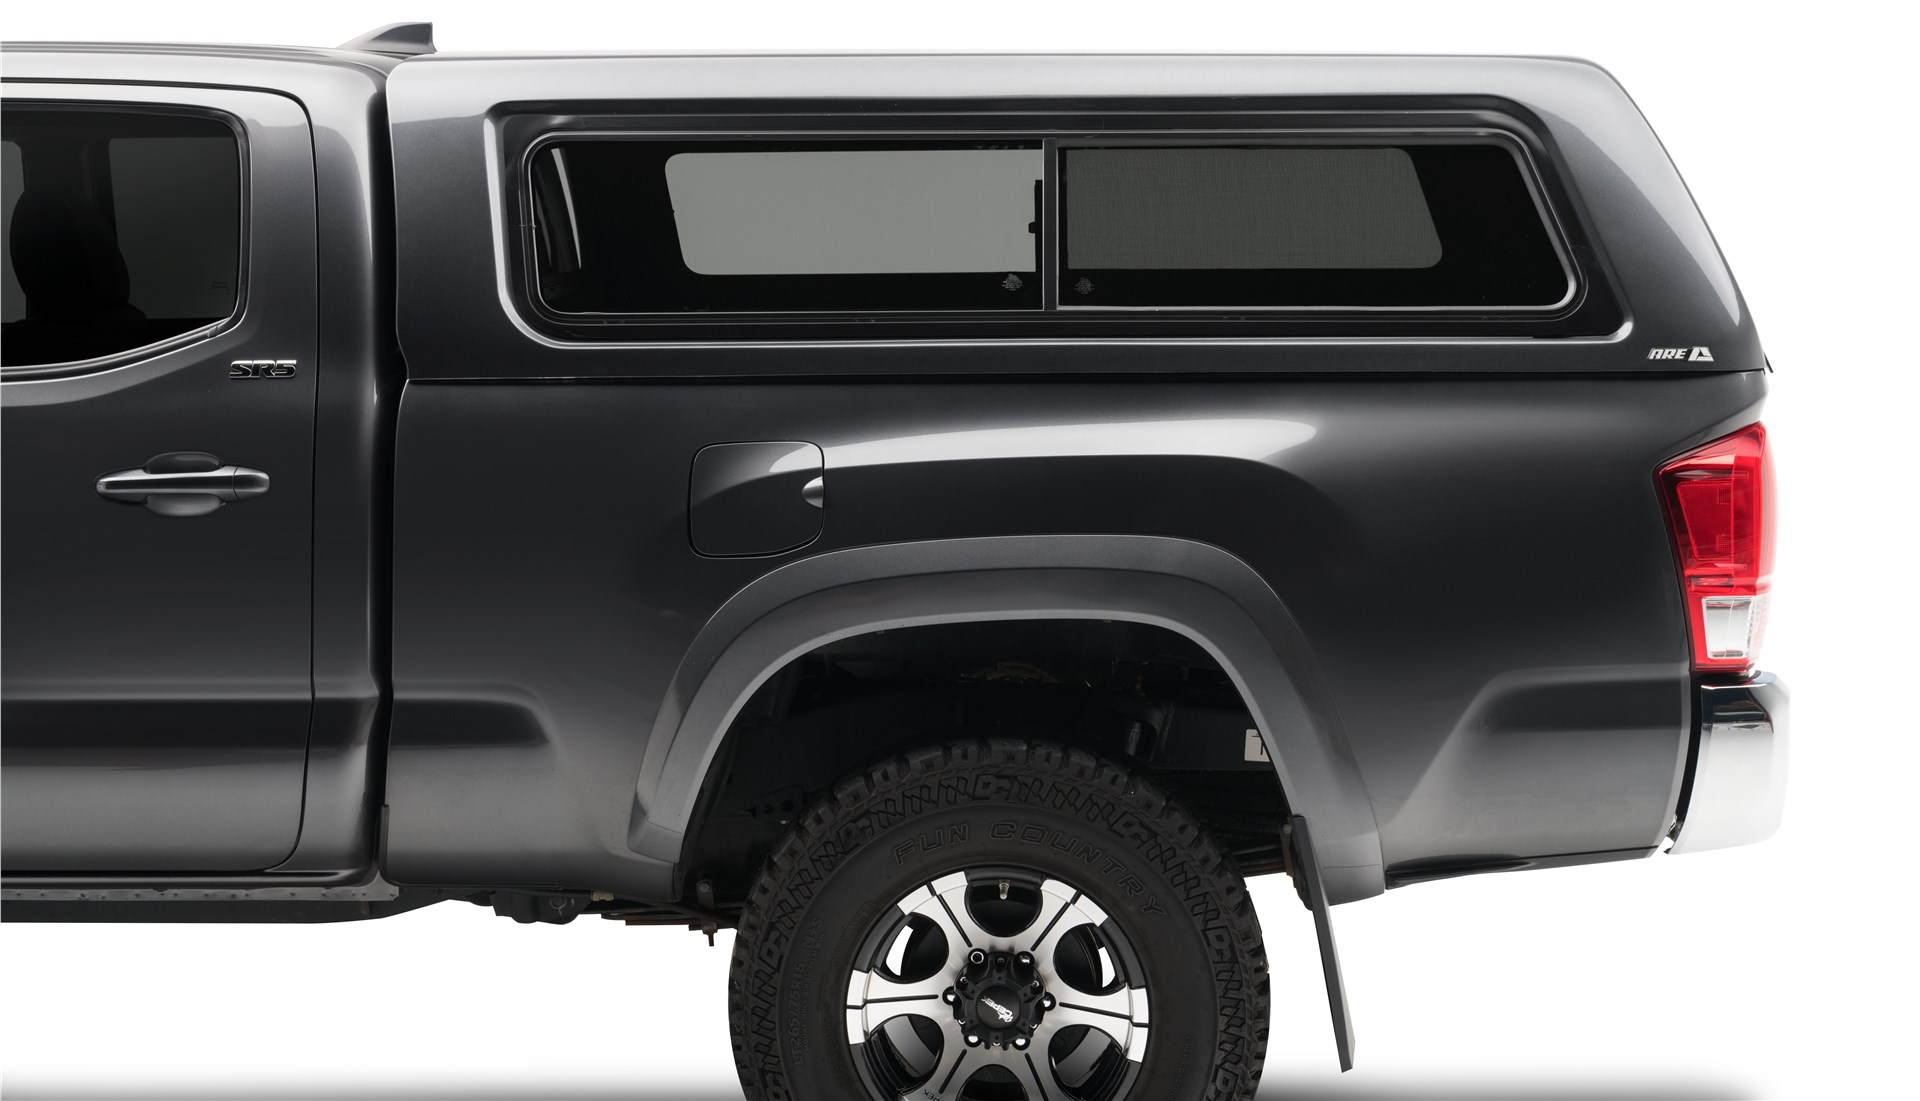 A.R.E. CX evolve camper shell on toyota tacoma side view